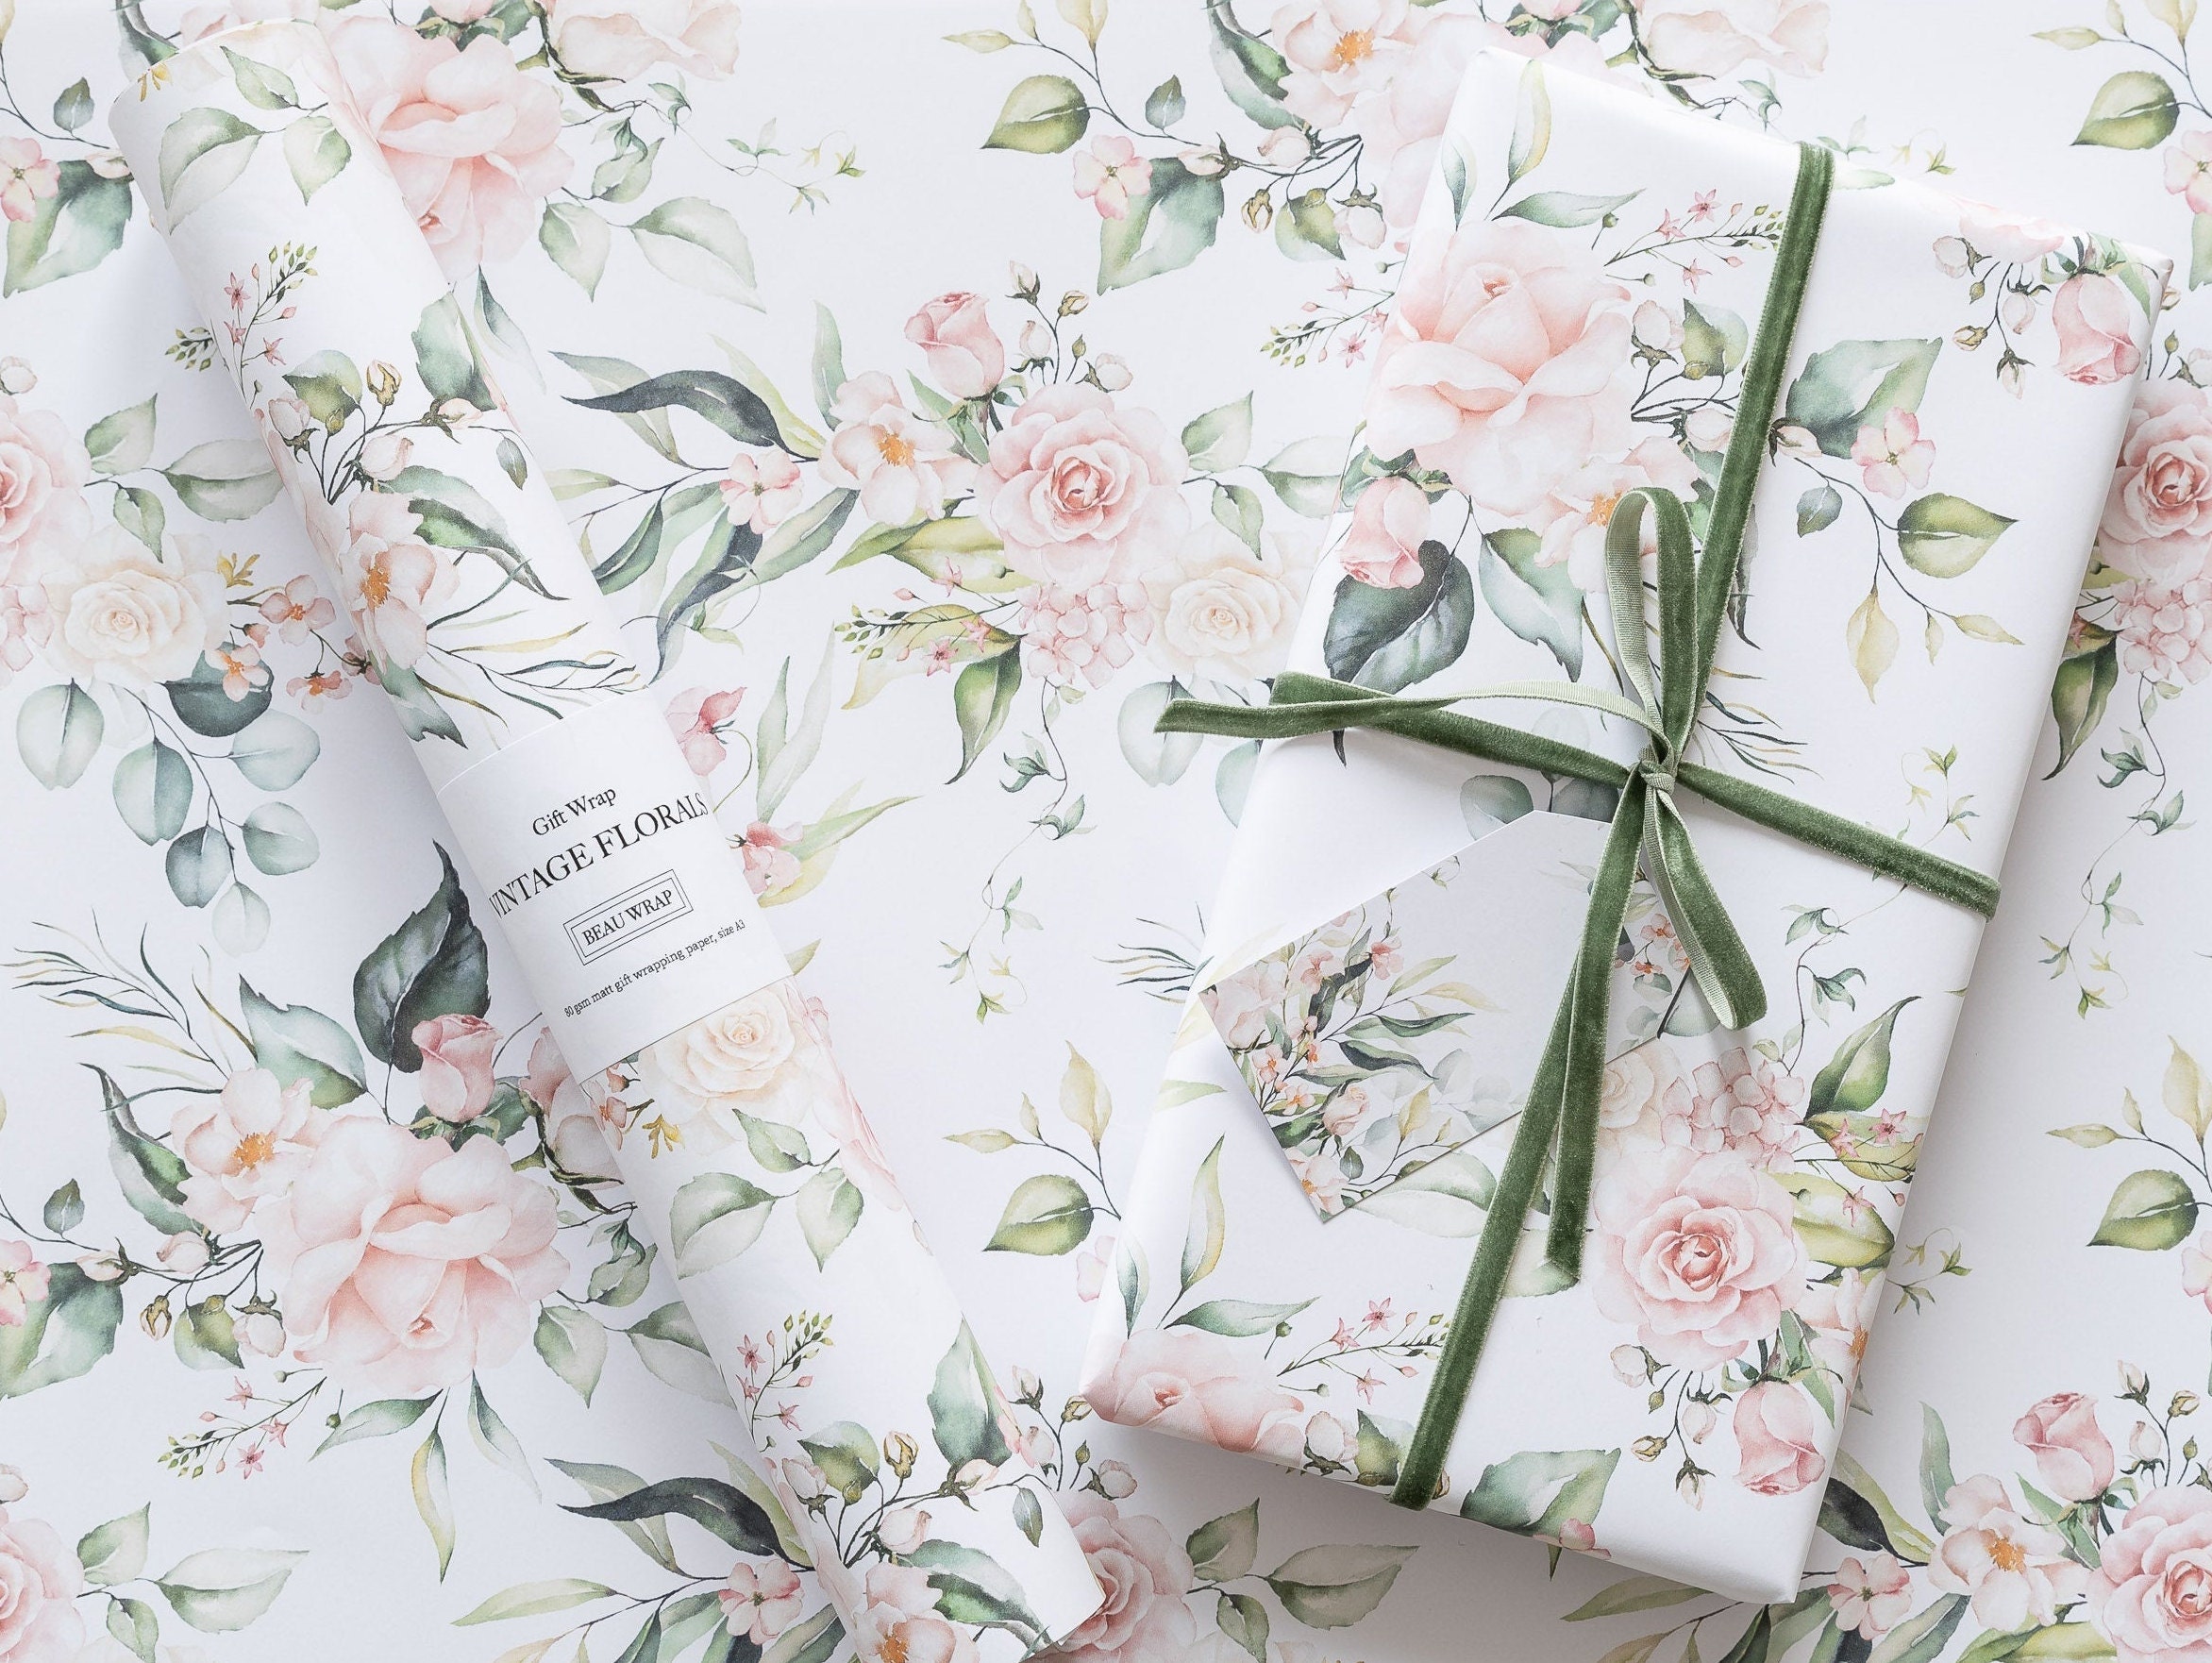 Vintage Floral Gift Wrapping Paper, 20 Sheets, Rose Luxury Gift Wrap,  Flower Gift Wrapping, Botanical Wrap, High Quality, 50x70cm, Rolled 